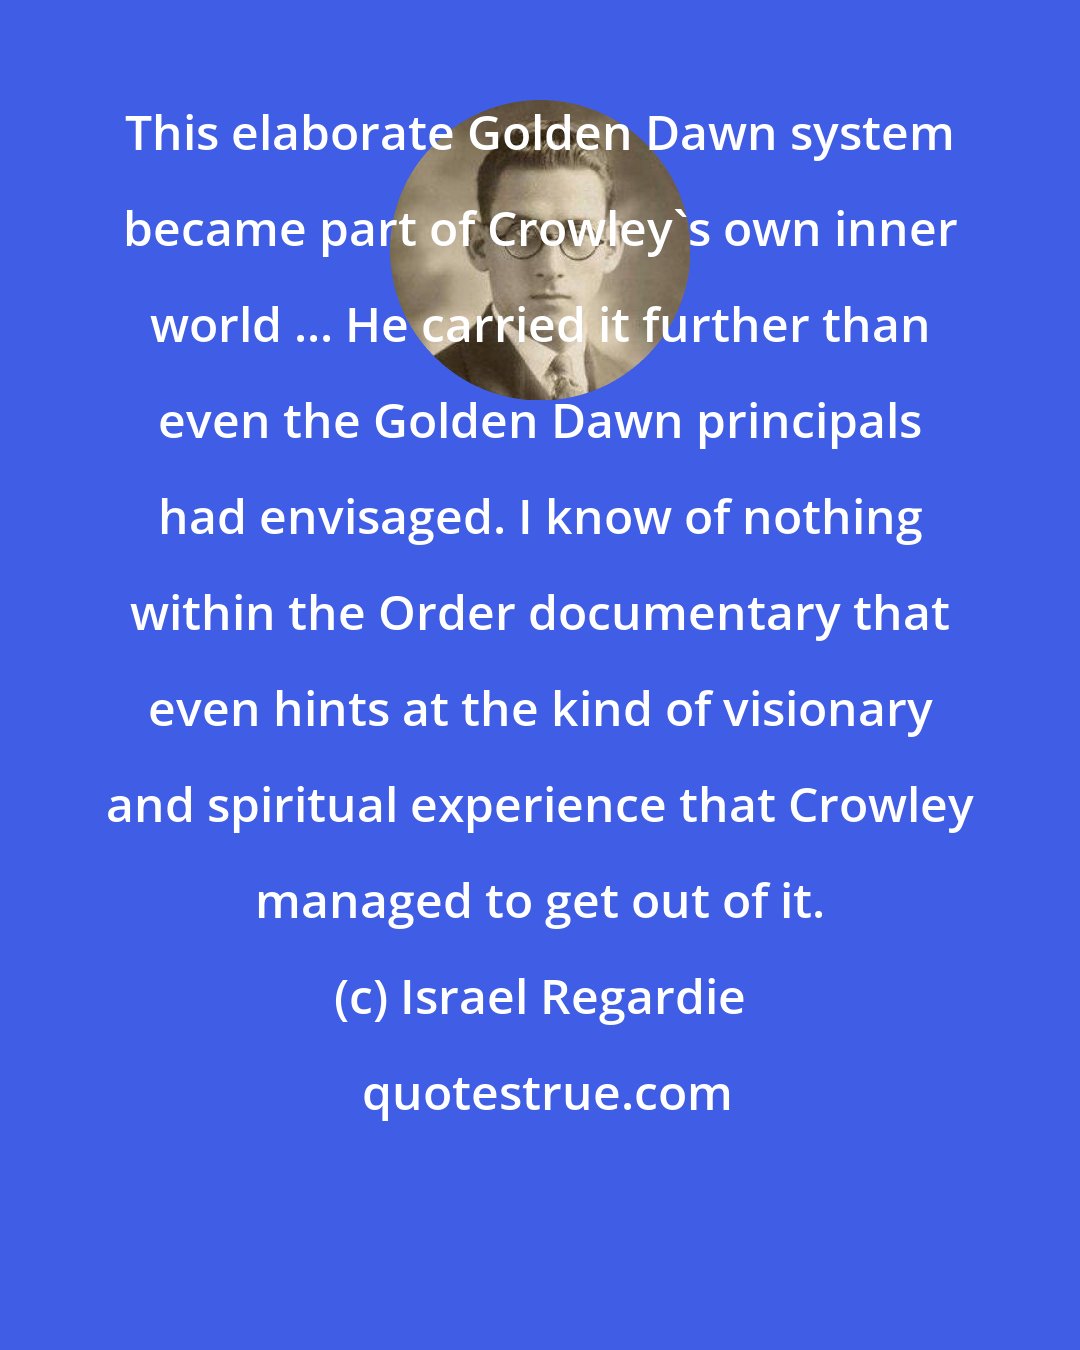 Israel Regardie: This elaborate Golden Dawn system became part of Crowley's own inner world ... He carried it further than even the Golden Dawn principals had envisaged. I know of nothing within the Order documentary that even hints at the kind of visionary and spiritual experience that Crowley managed to get out of it.